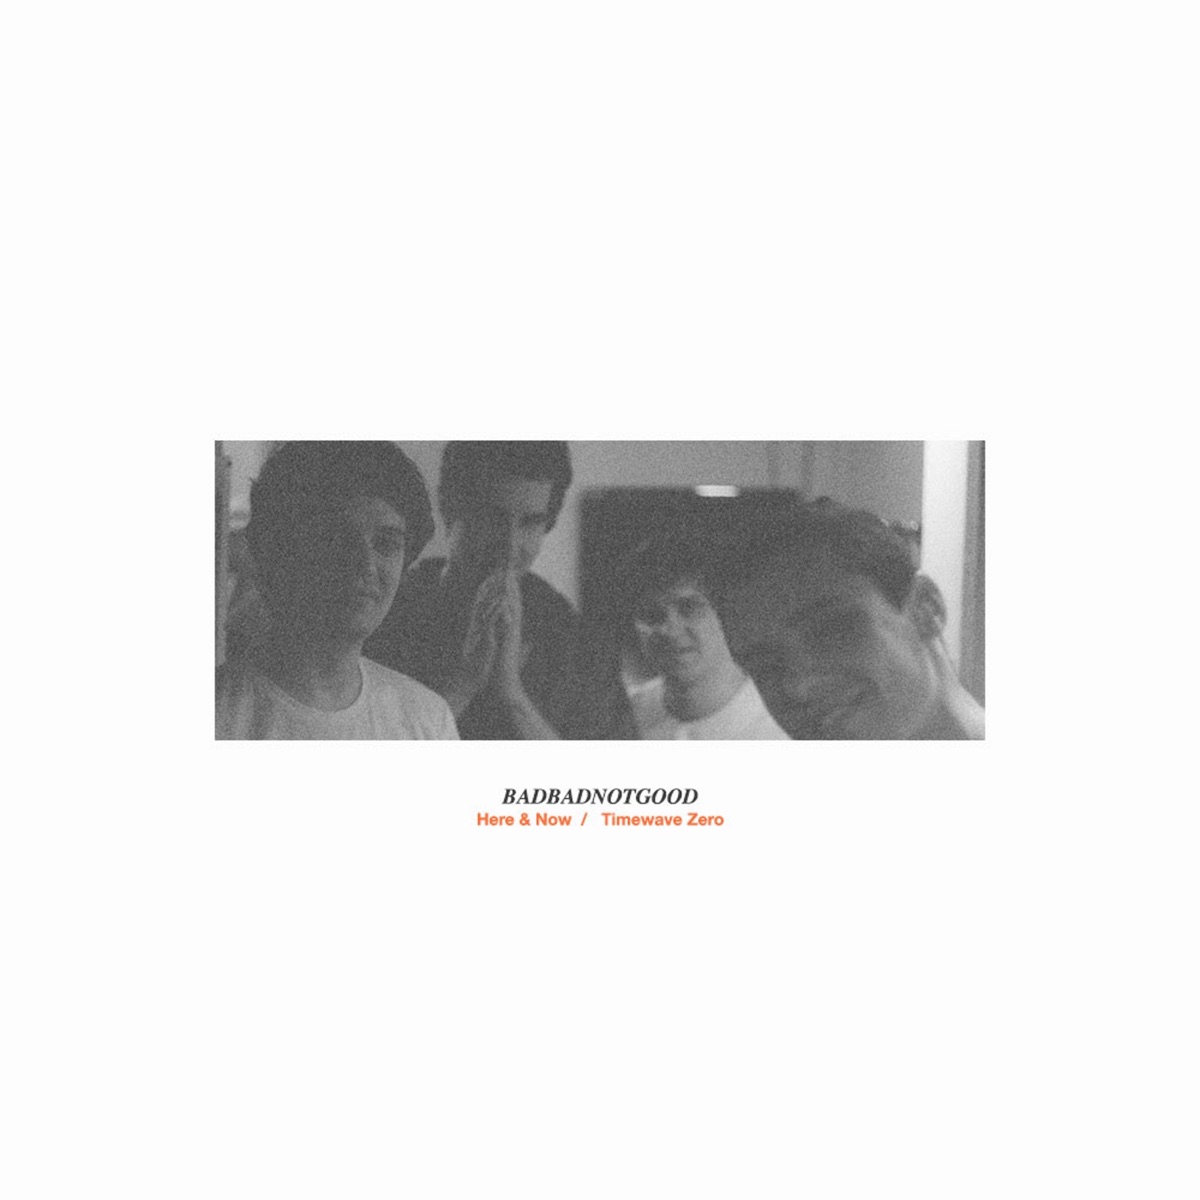 BADBADNOTGOOD Return to Their Jazz Roots on Brilliant New Album 'Talk  Memory' - This Song Is Sick